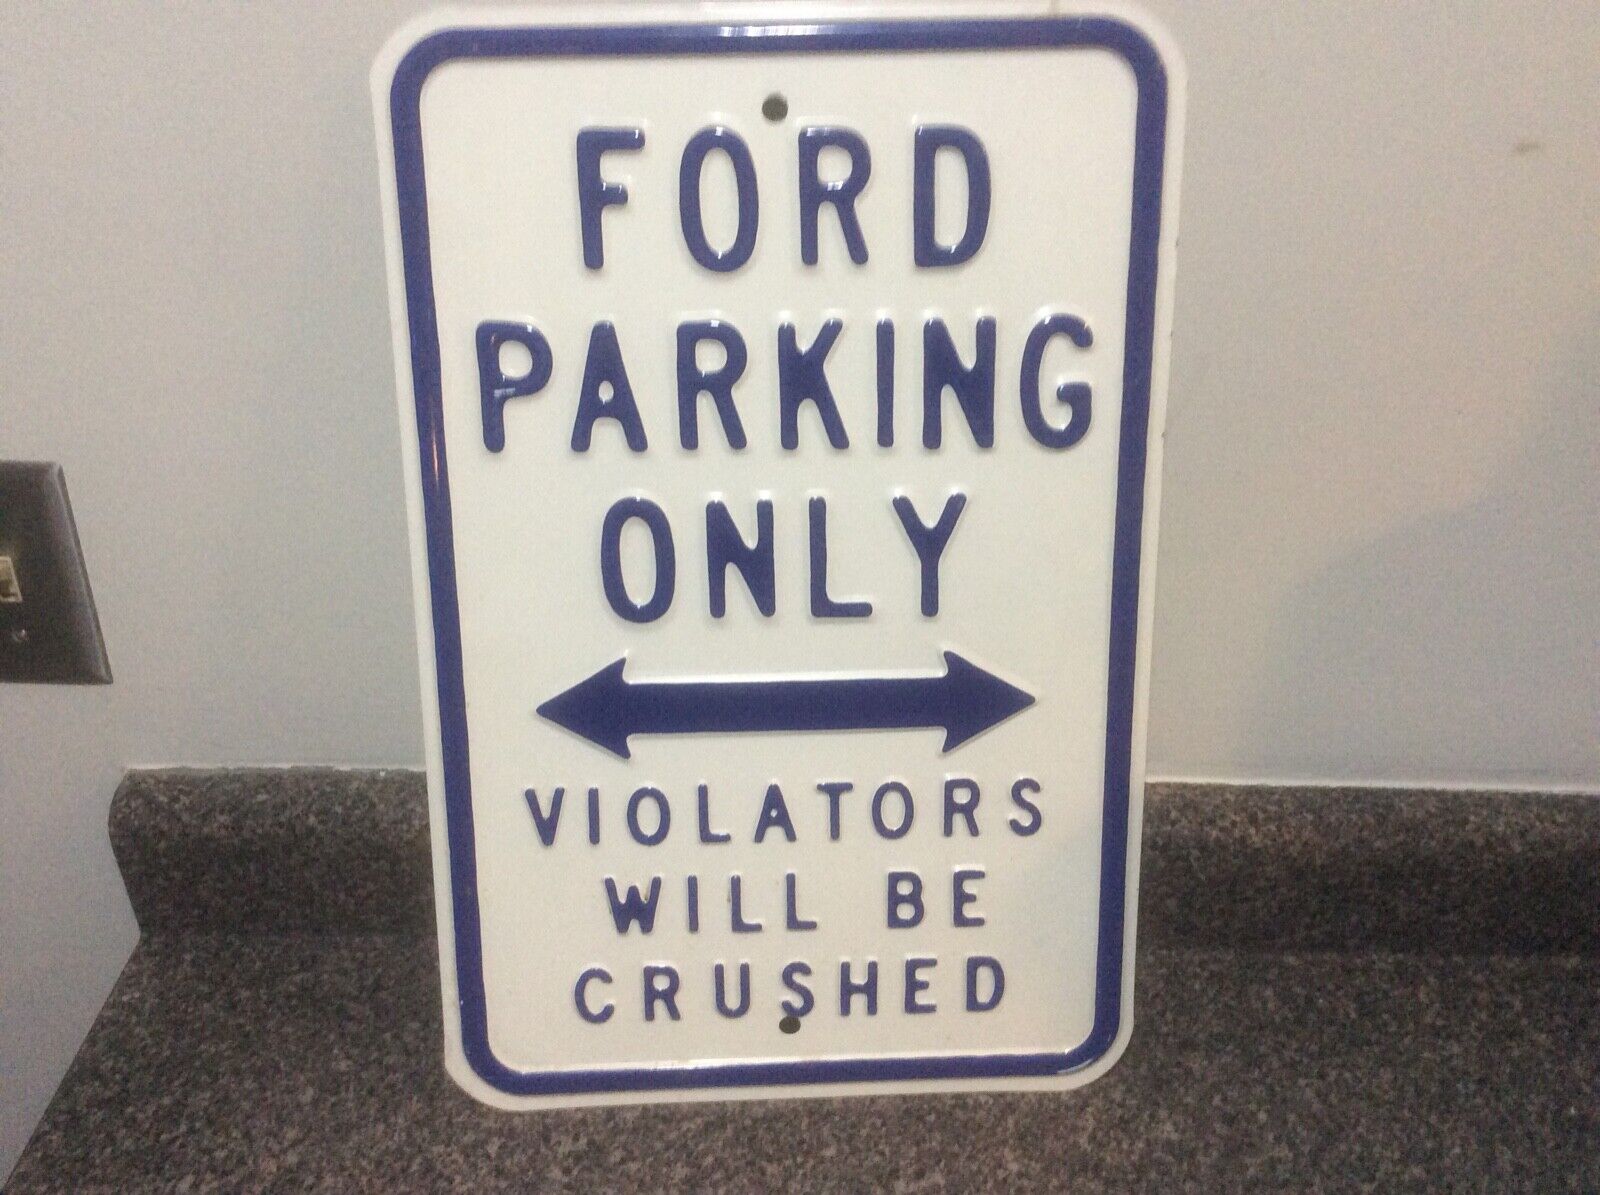 FORD Parking Only Heavy Street Sign Auto Garage Home Office Metal Mancave